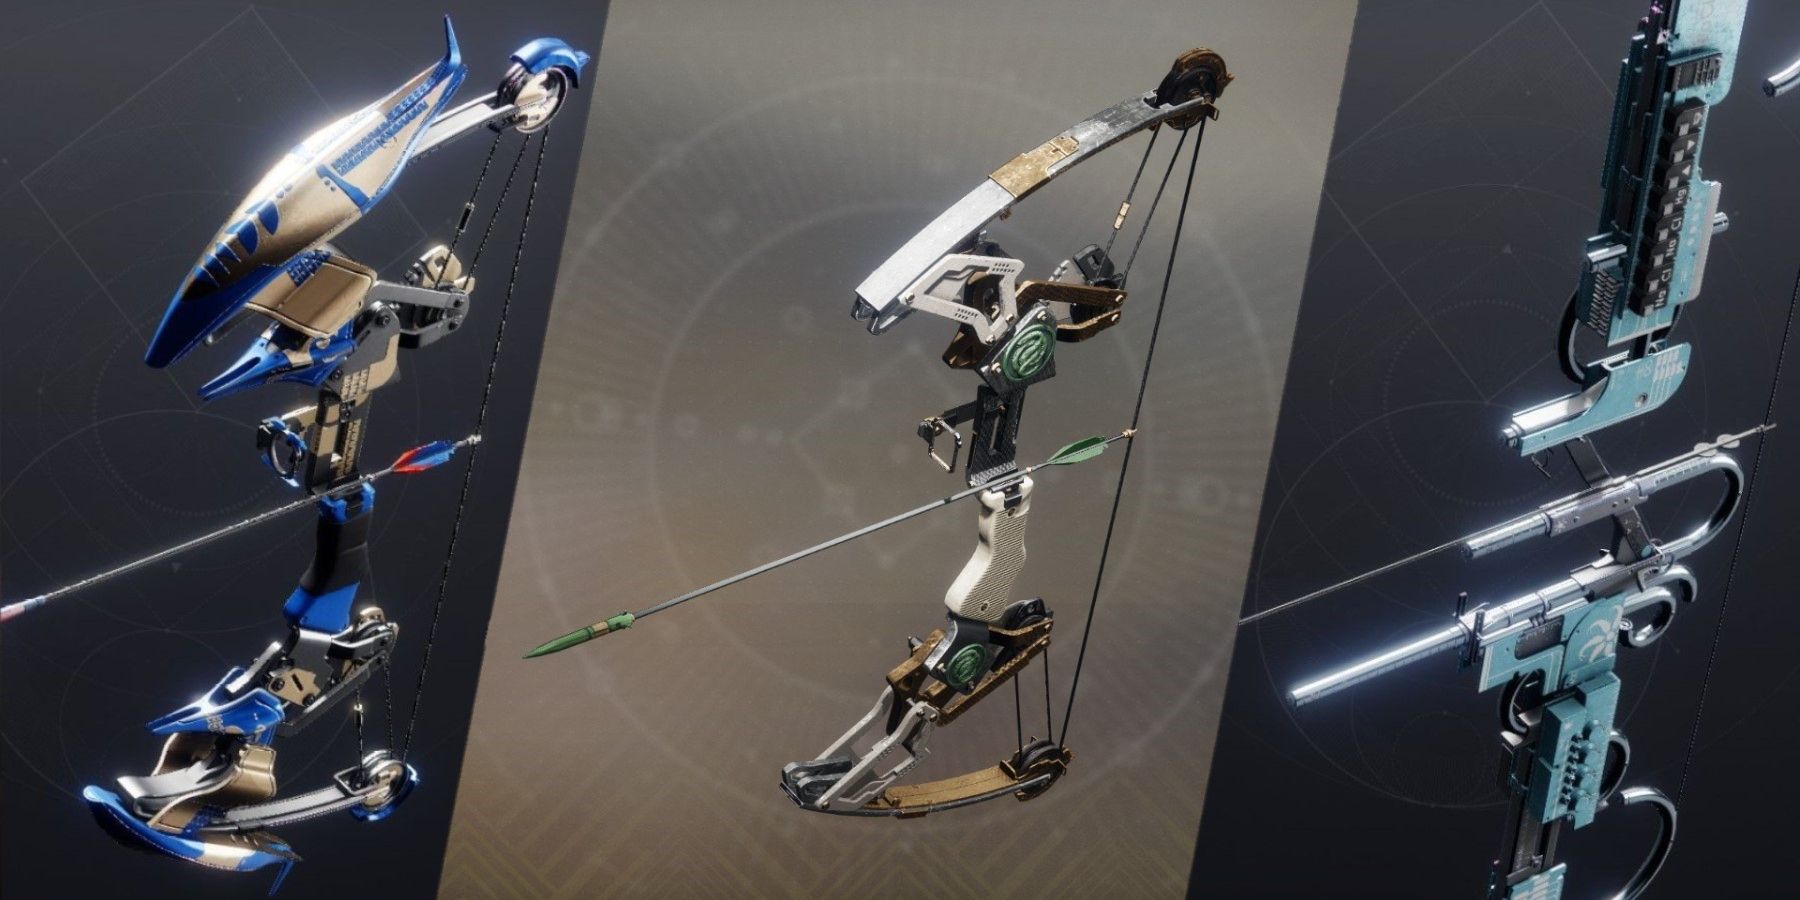 destiny 2 the witch queen expansion player makes crafted throne world weapon a better hush archer's tempo archer's gambit successful warm-up fel taradiddle